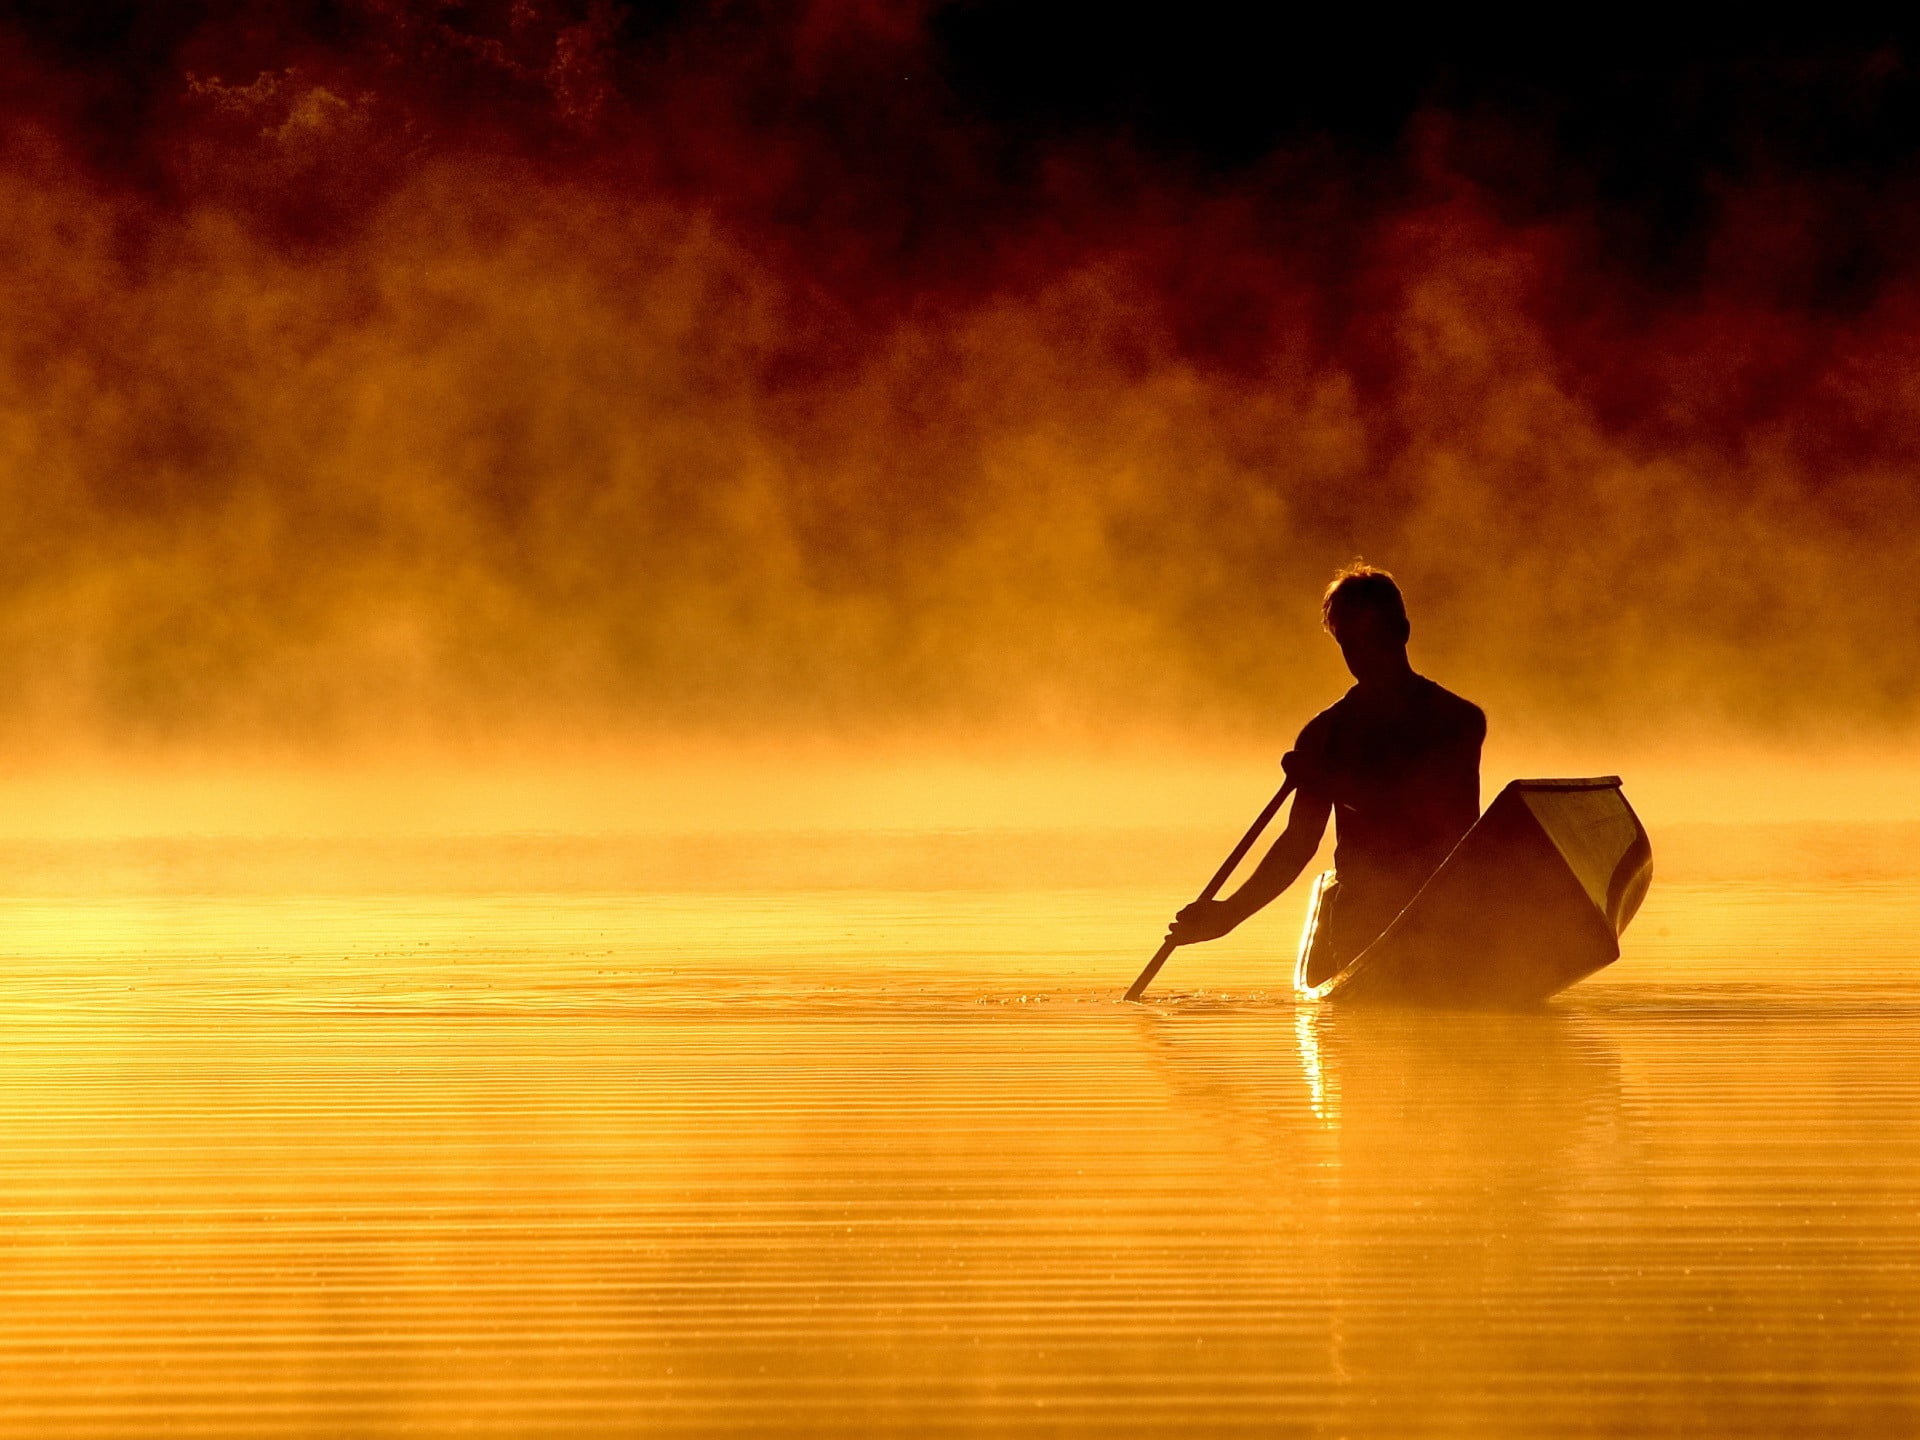 gray boat, decline, orange evening, guy, rowing, back, silhouette